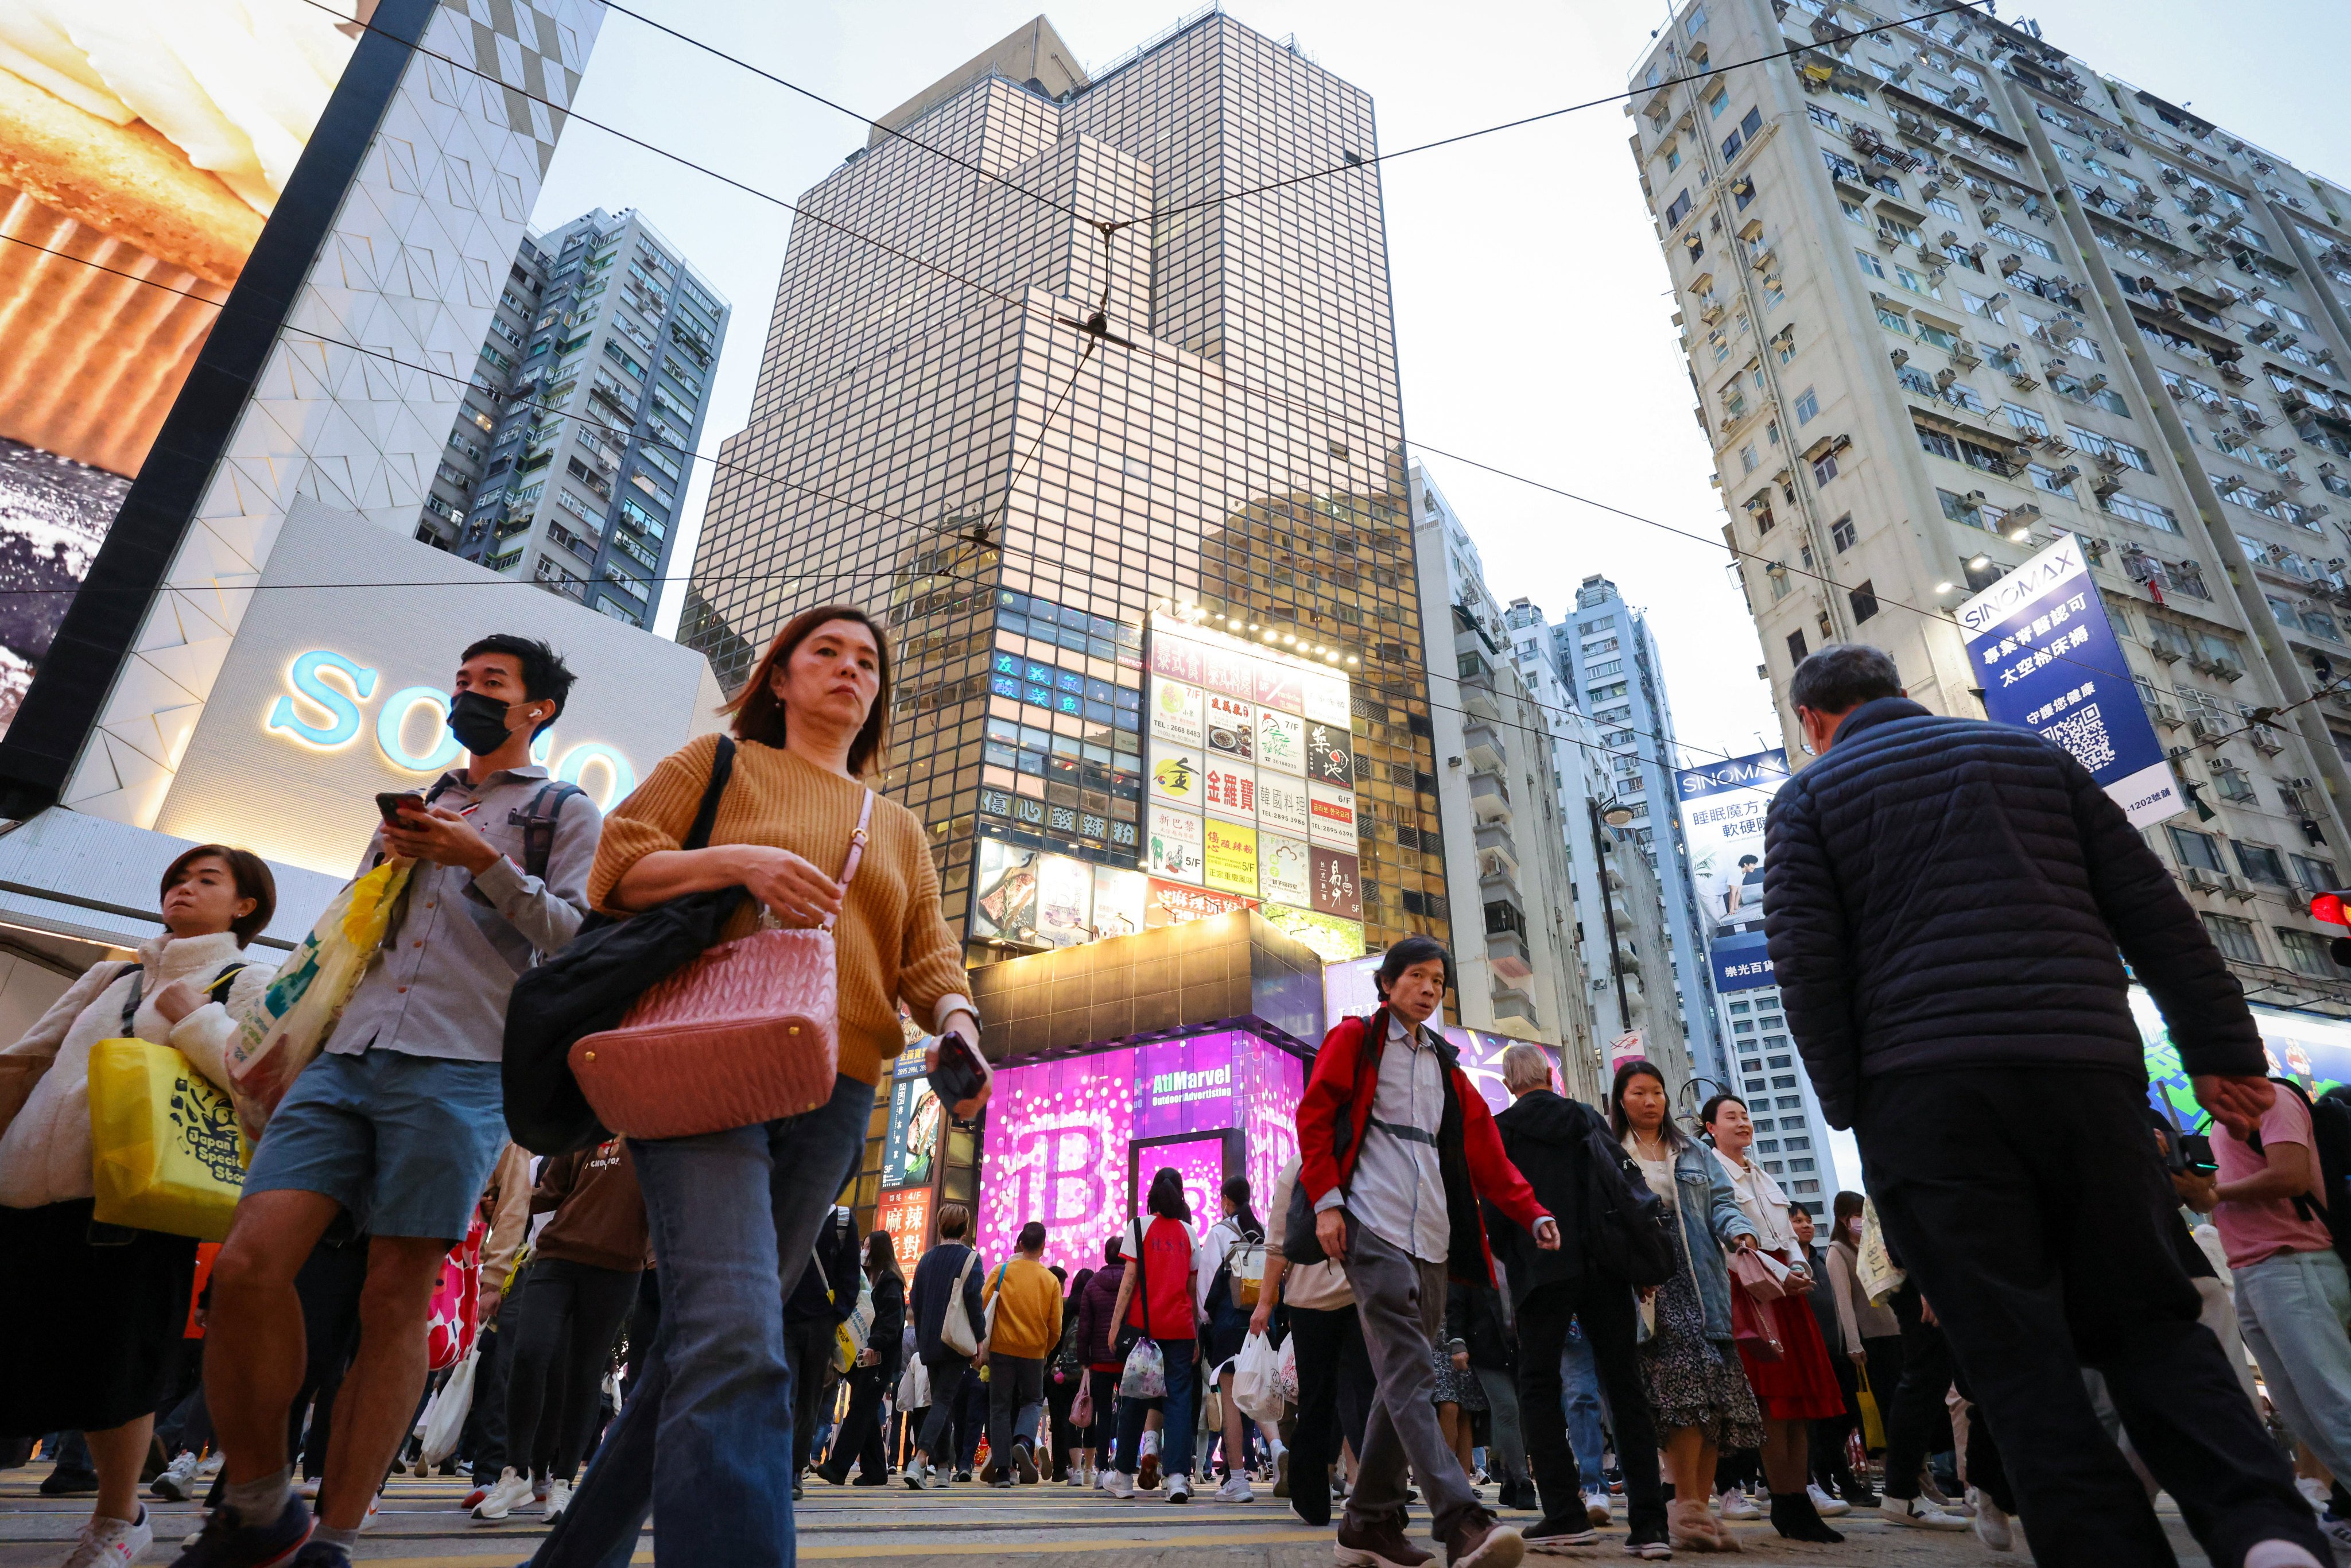 Hong Kong’s finance chief will unveil his latest budget on February 28 and report on the city’s financial and economic performance over the past year. Photo: May Tse